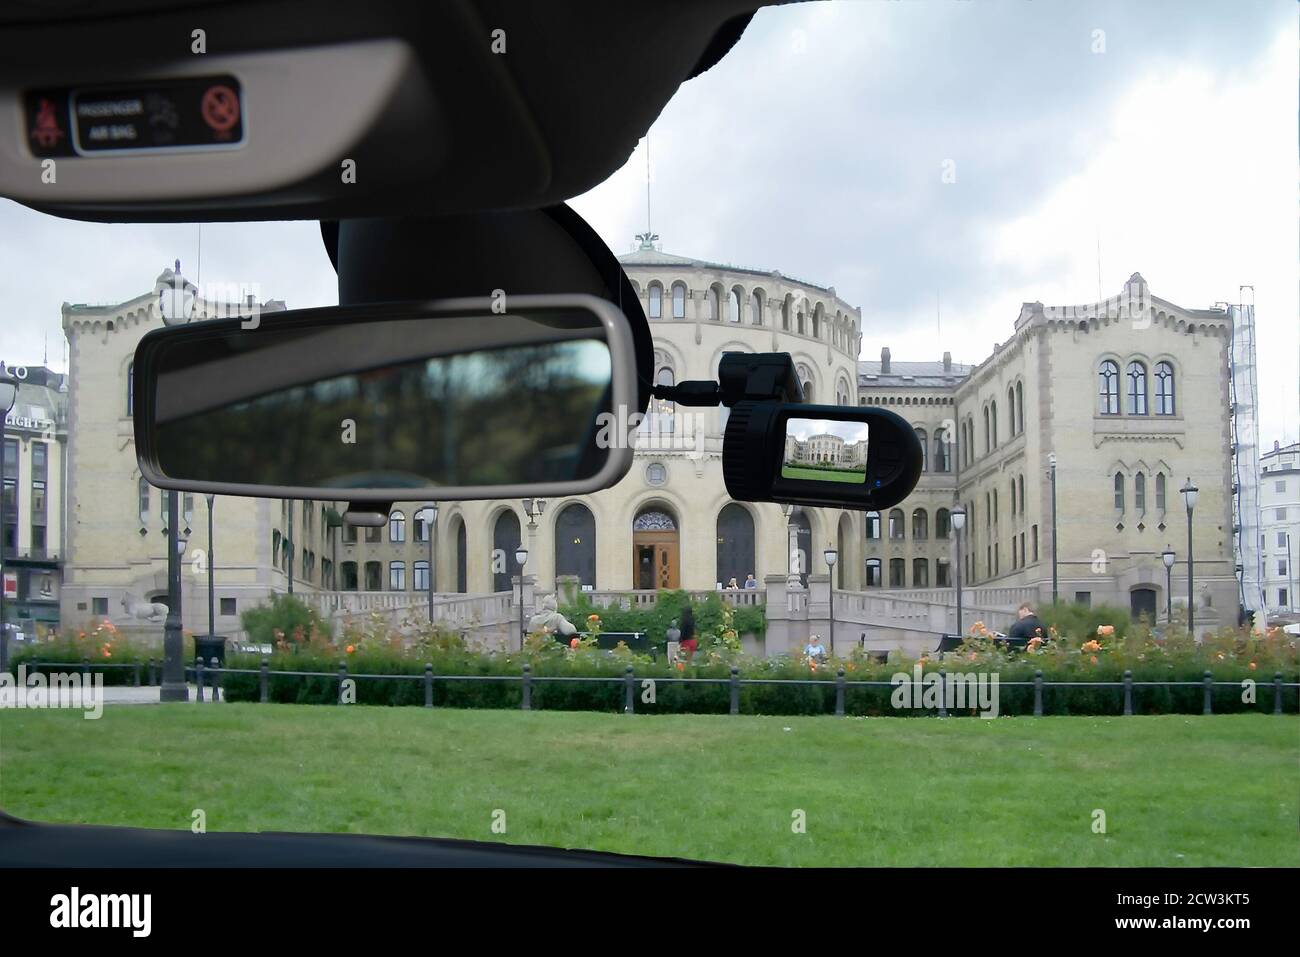 Looking through a dashcam car camera installed on a windshield with view of the facade of the Norwegian Parliament in Oslo, Norway Stock Photo